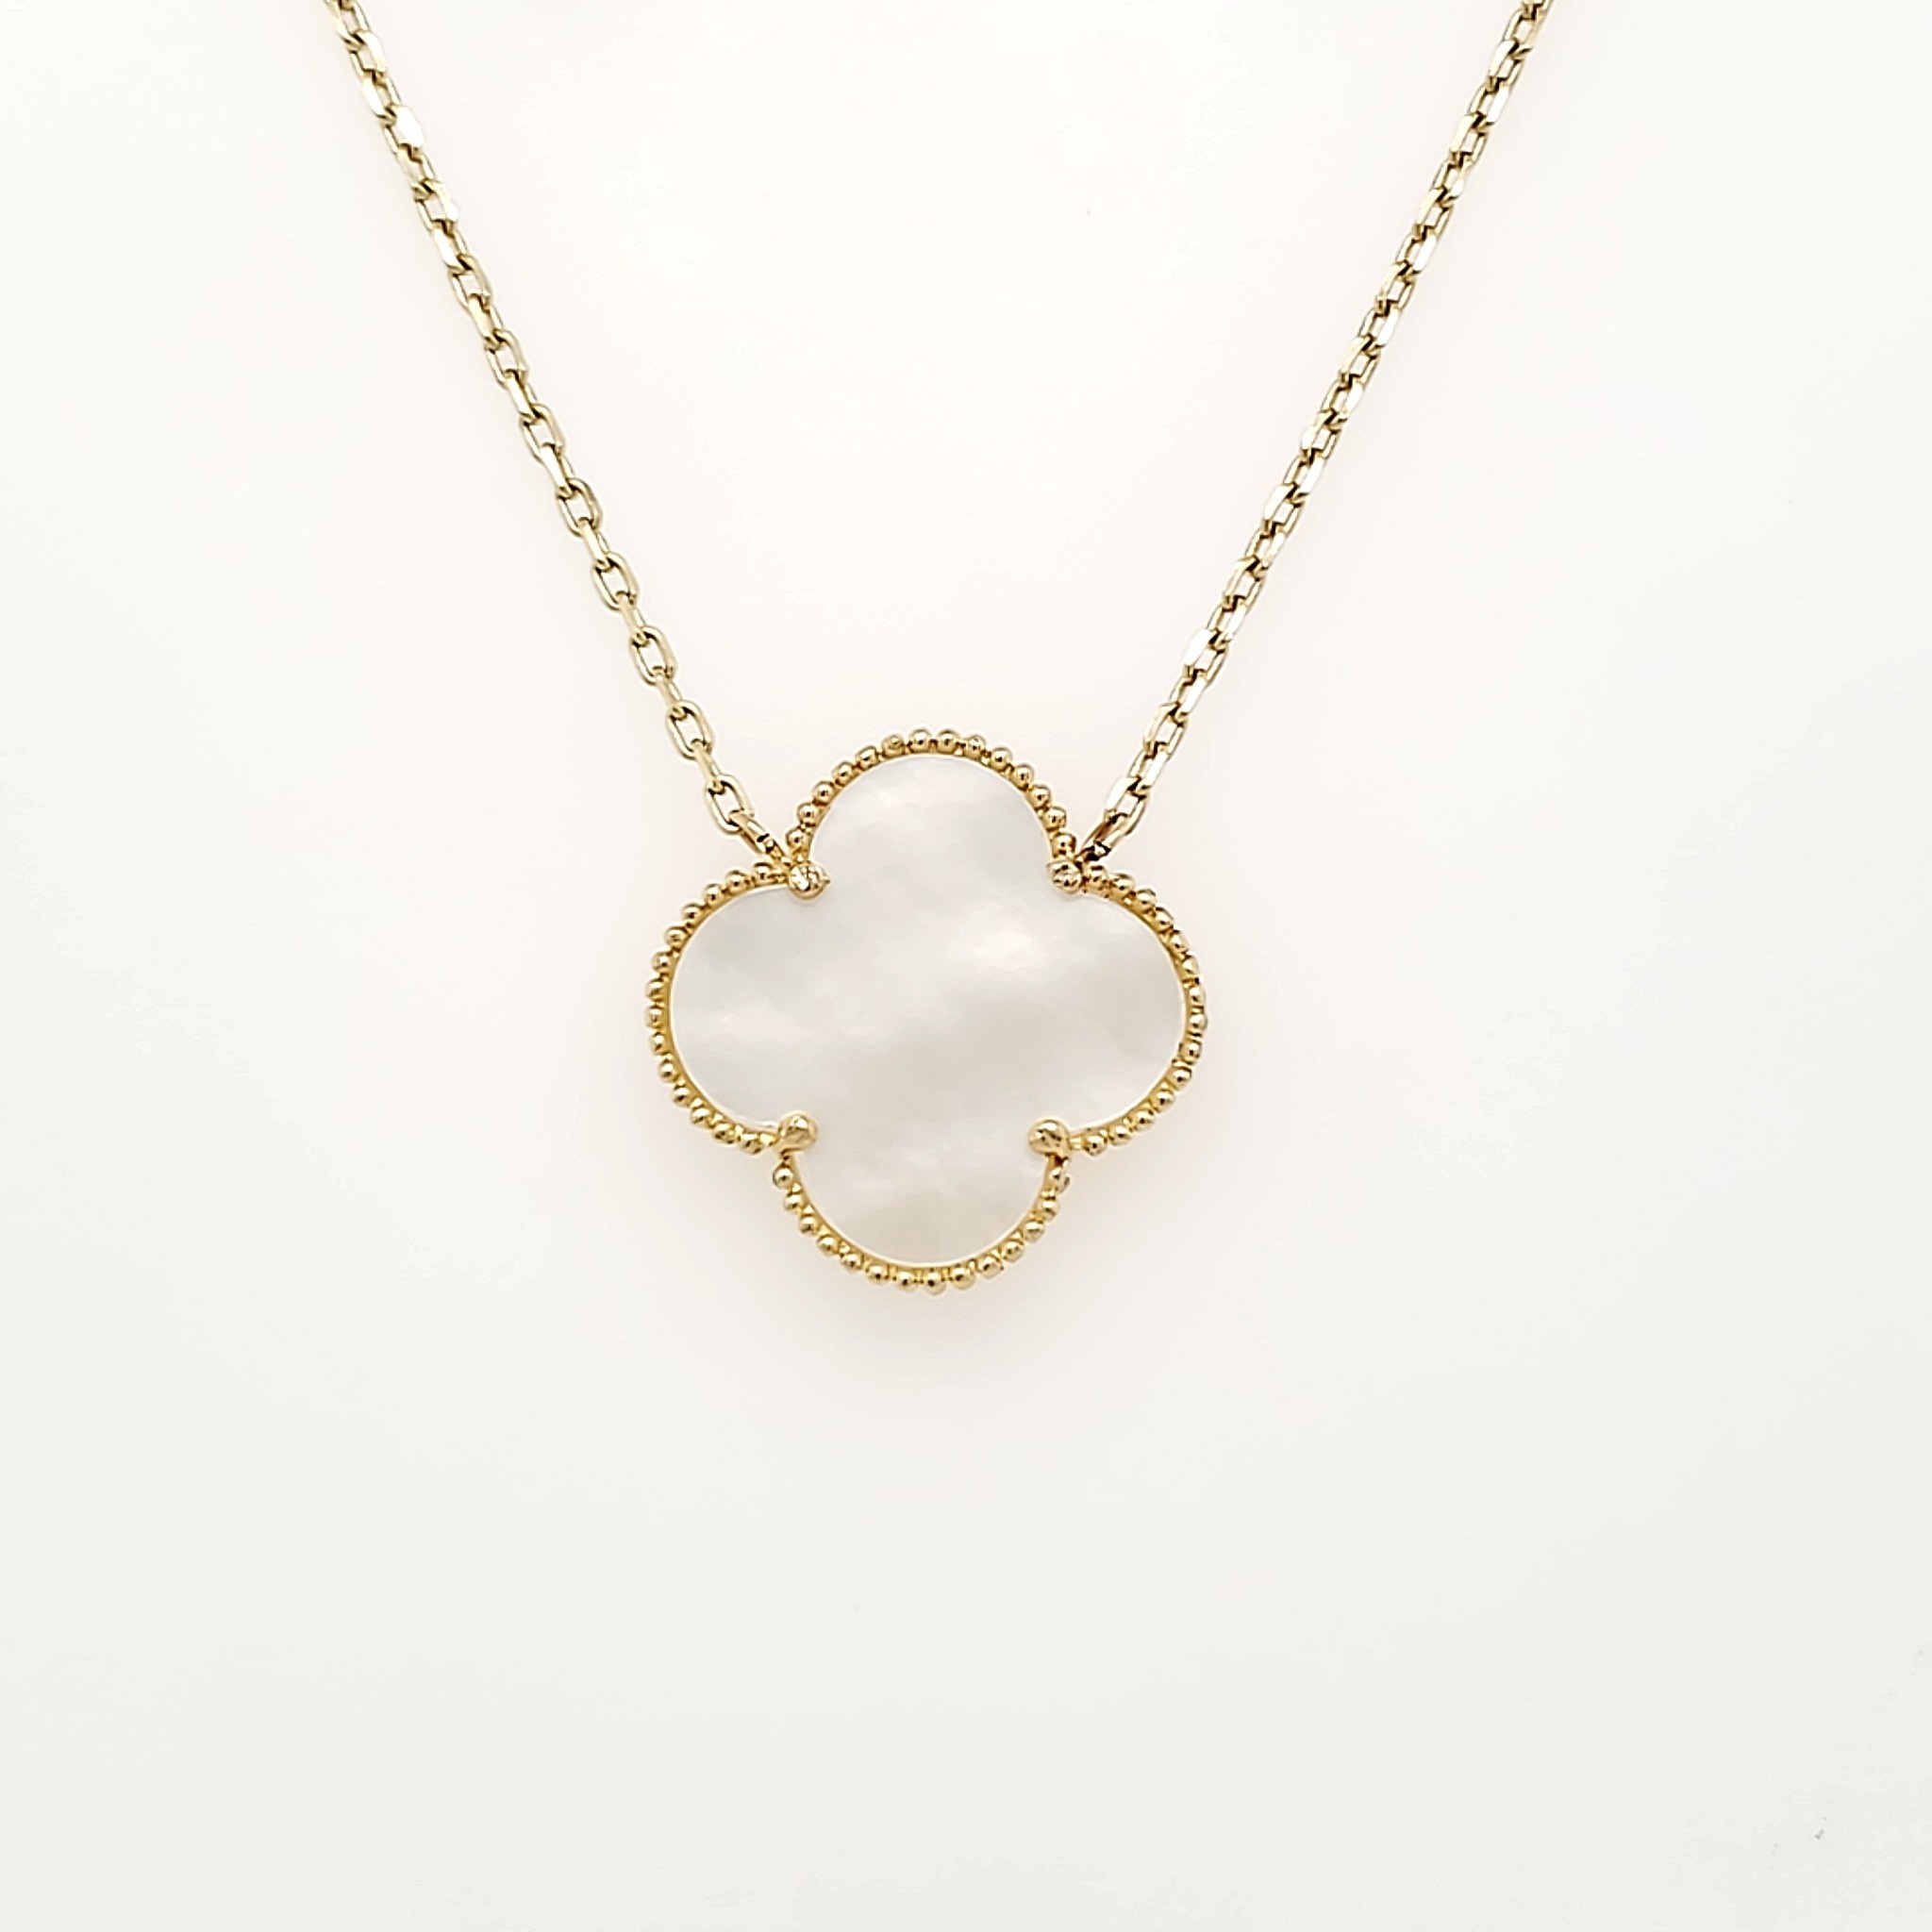 70266 14K YELLOW GOLD MOTHER OF PEARL CLOVER NECKLACE